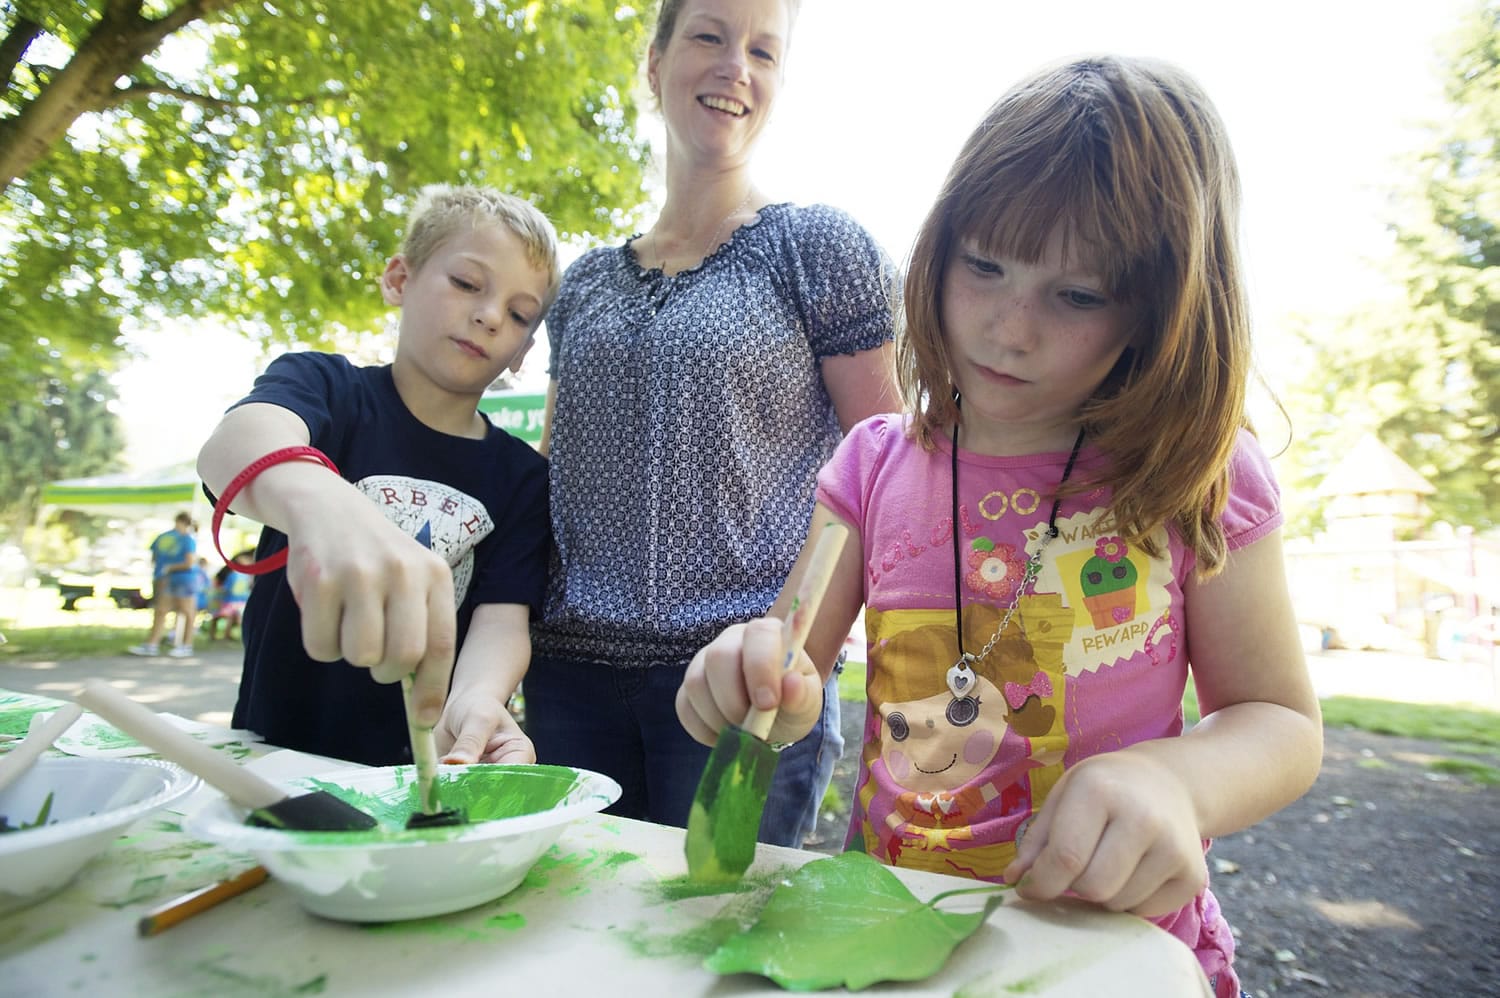 Photos by Steven Lane/The Columbian
Kevin Sheehan, 8, left, and sister Caoimhe Sheehan, 7, make leaf prints Wednesday at the Water Resources Education Center tent during the first Noon Concert at Esther Short Park in Vancouver.